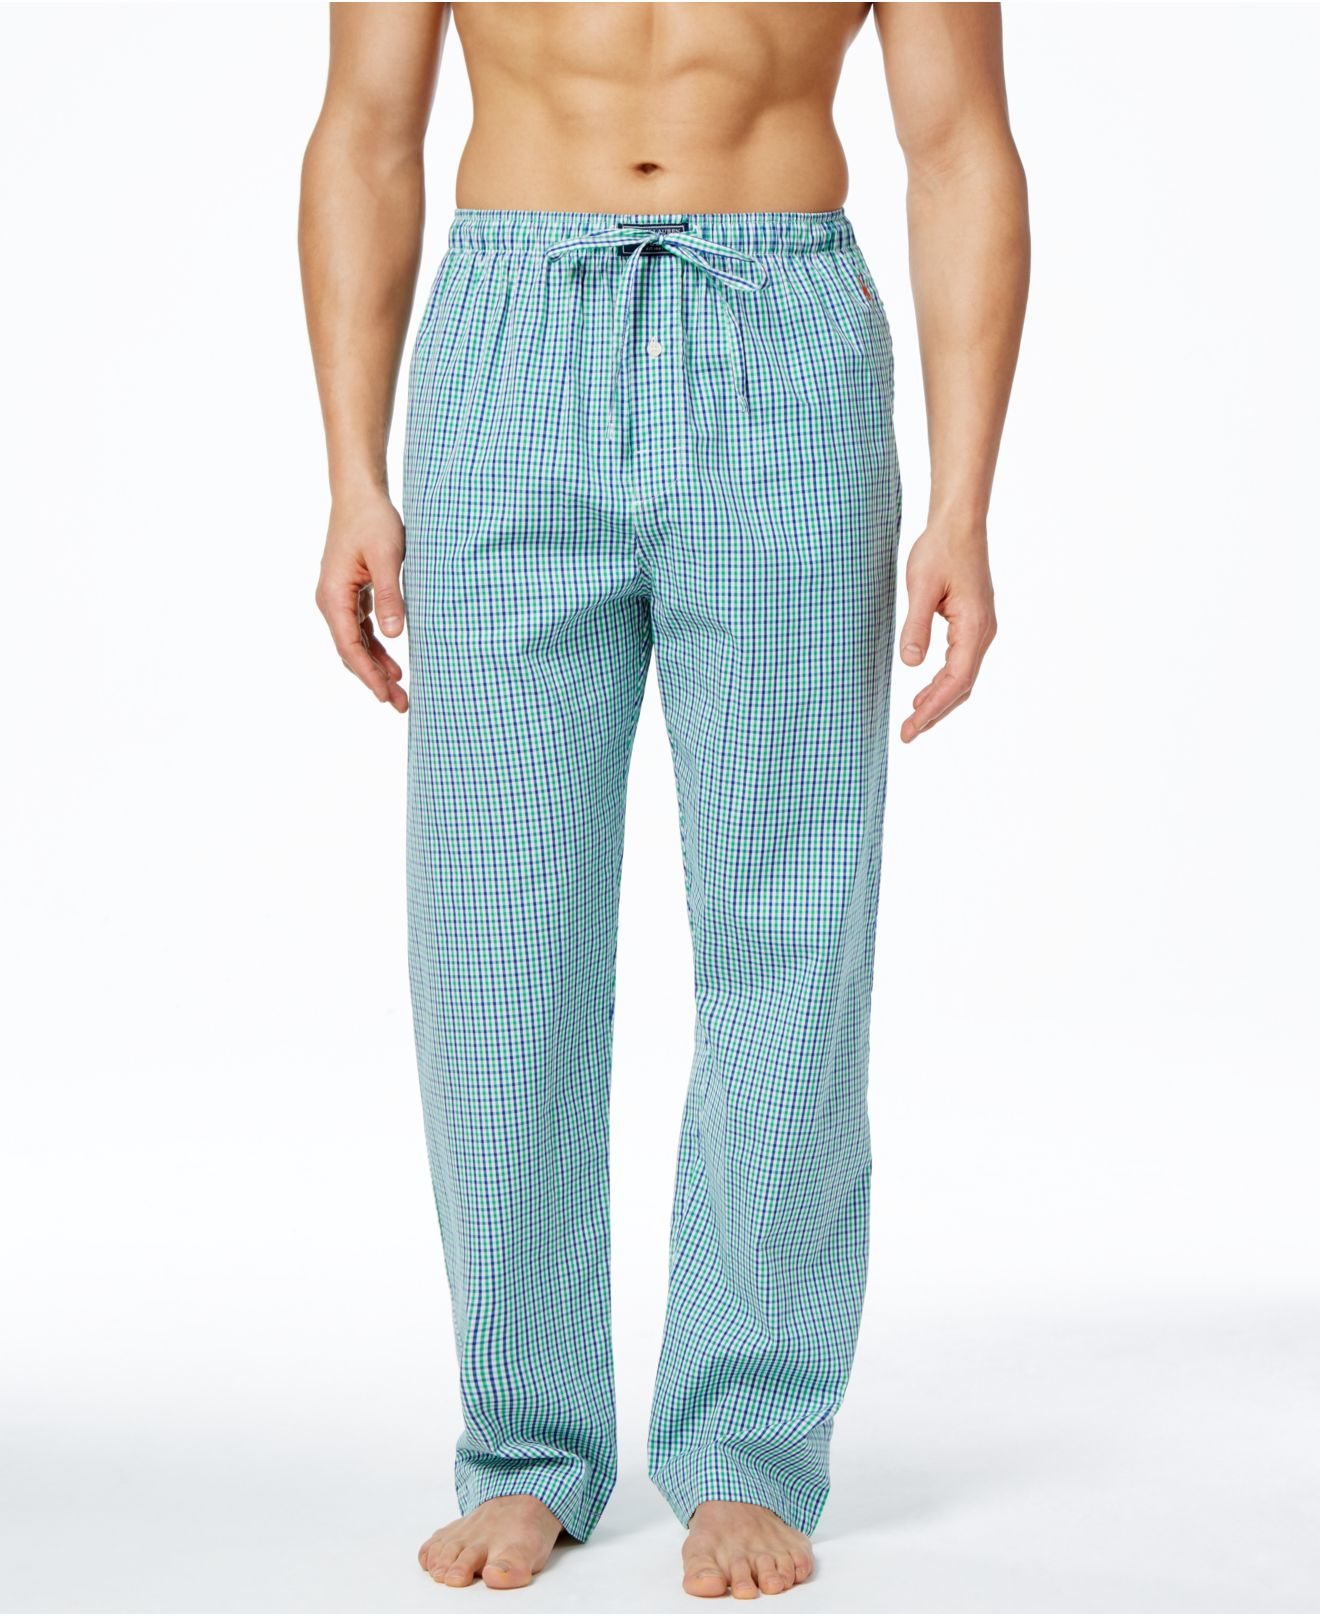 Lyst - Polo Ralph Lauren Men's Blue And Green Check Woven Pajama Pants ...